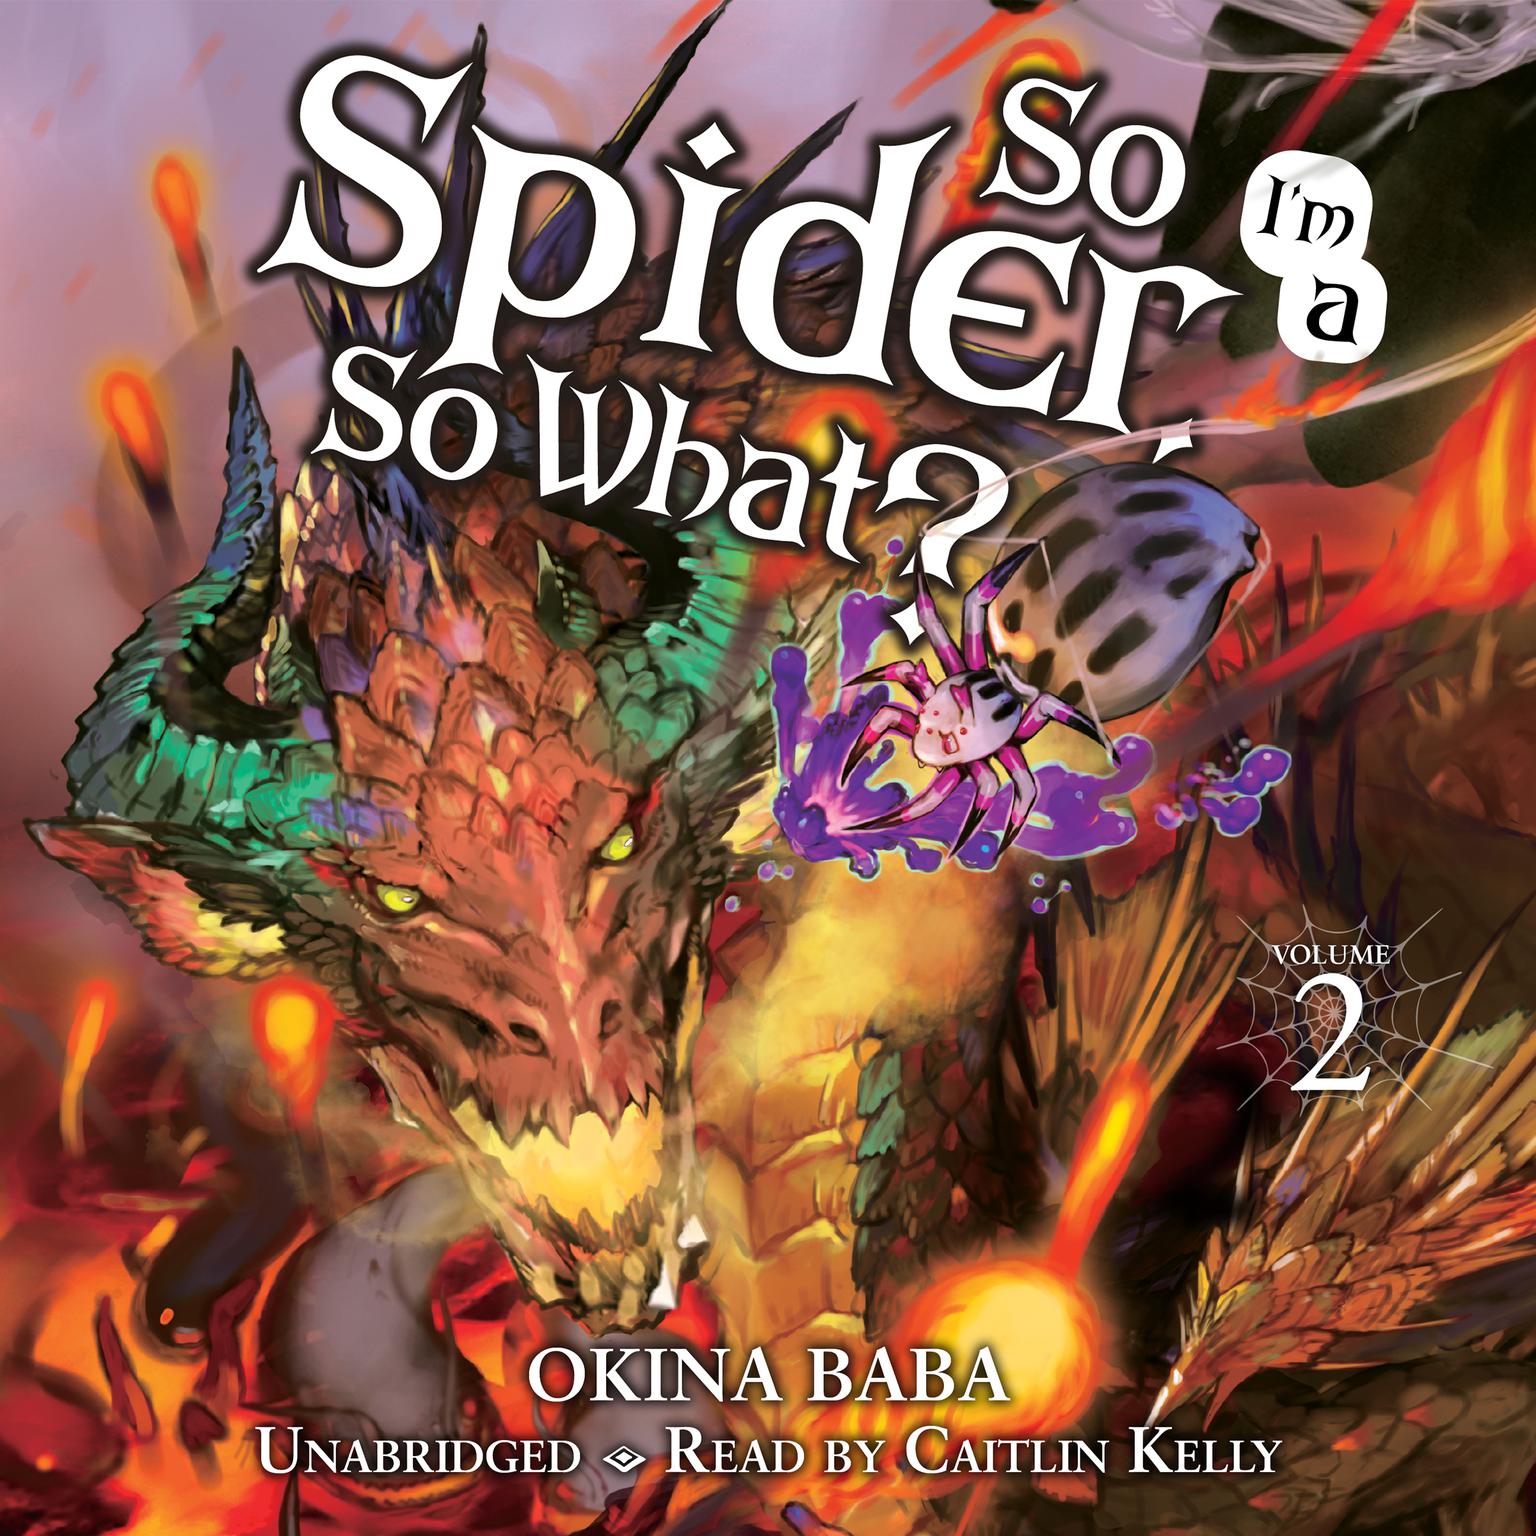 So Im a Spider, So What?, Vol. 2 Audiobook, by Okina Baba